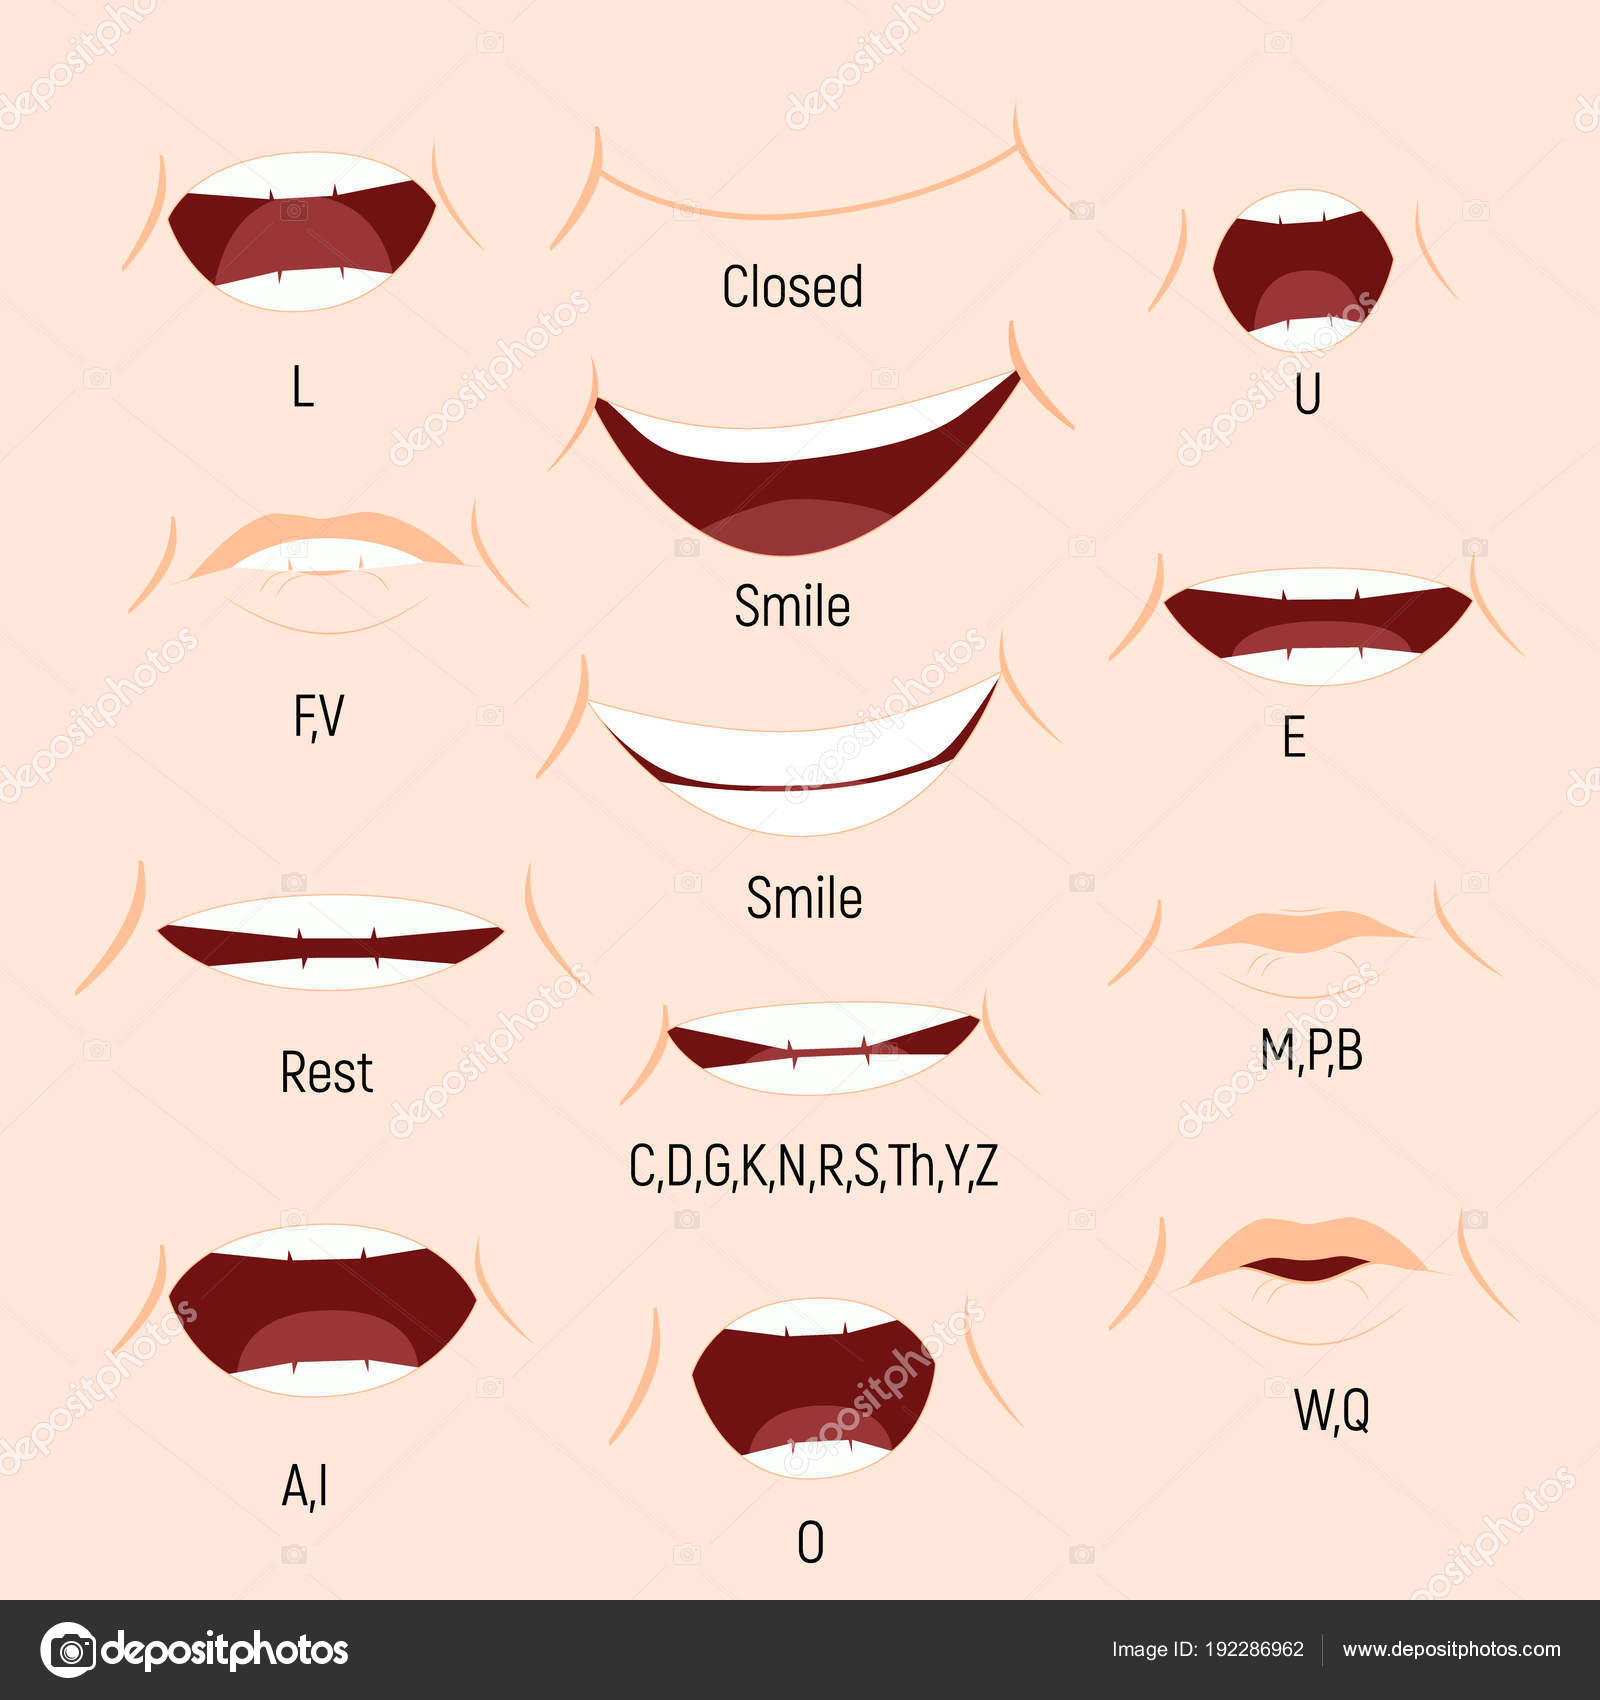 Lips sync mouth Vector Art Stock Images | Depositphotos